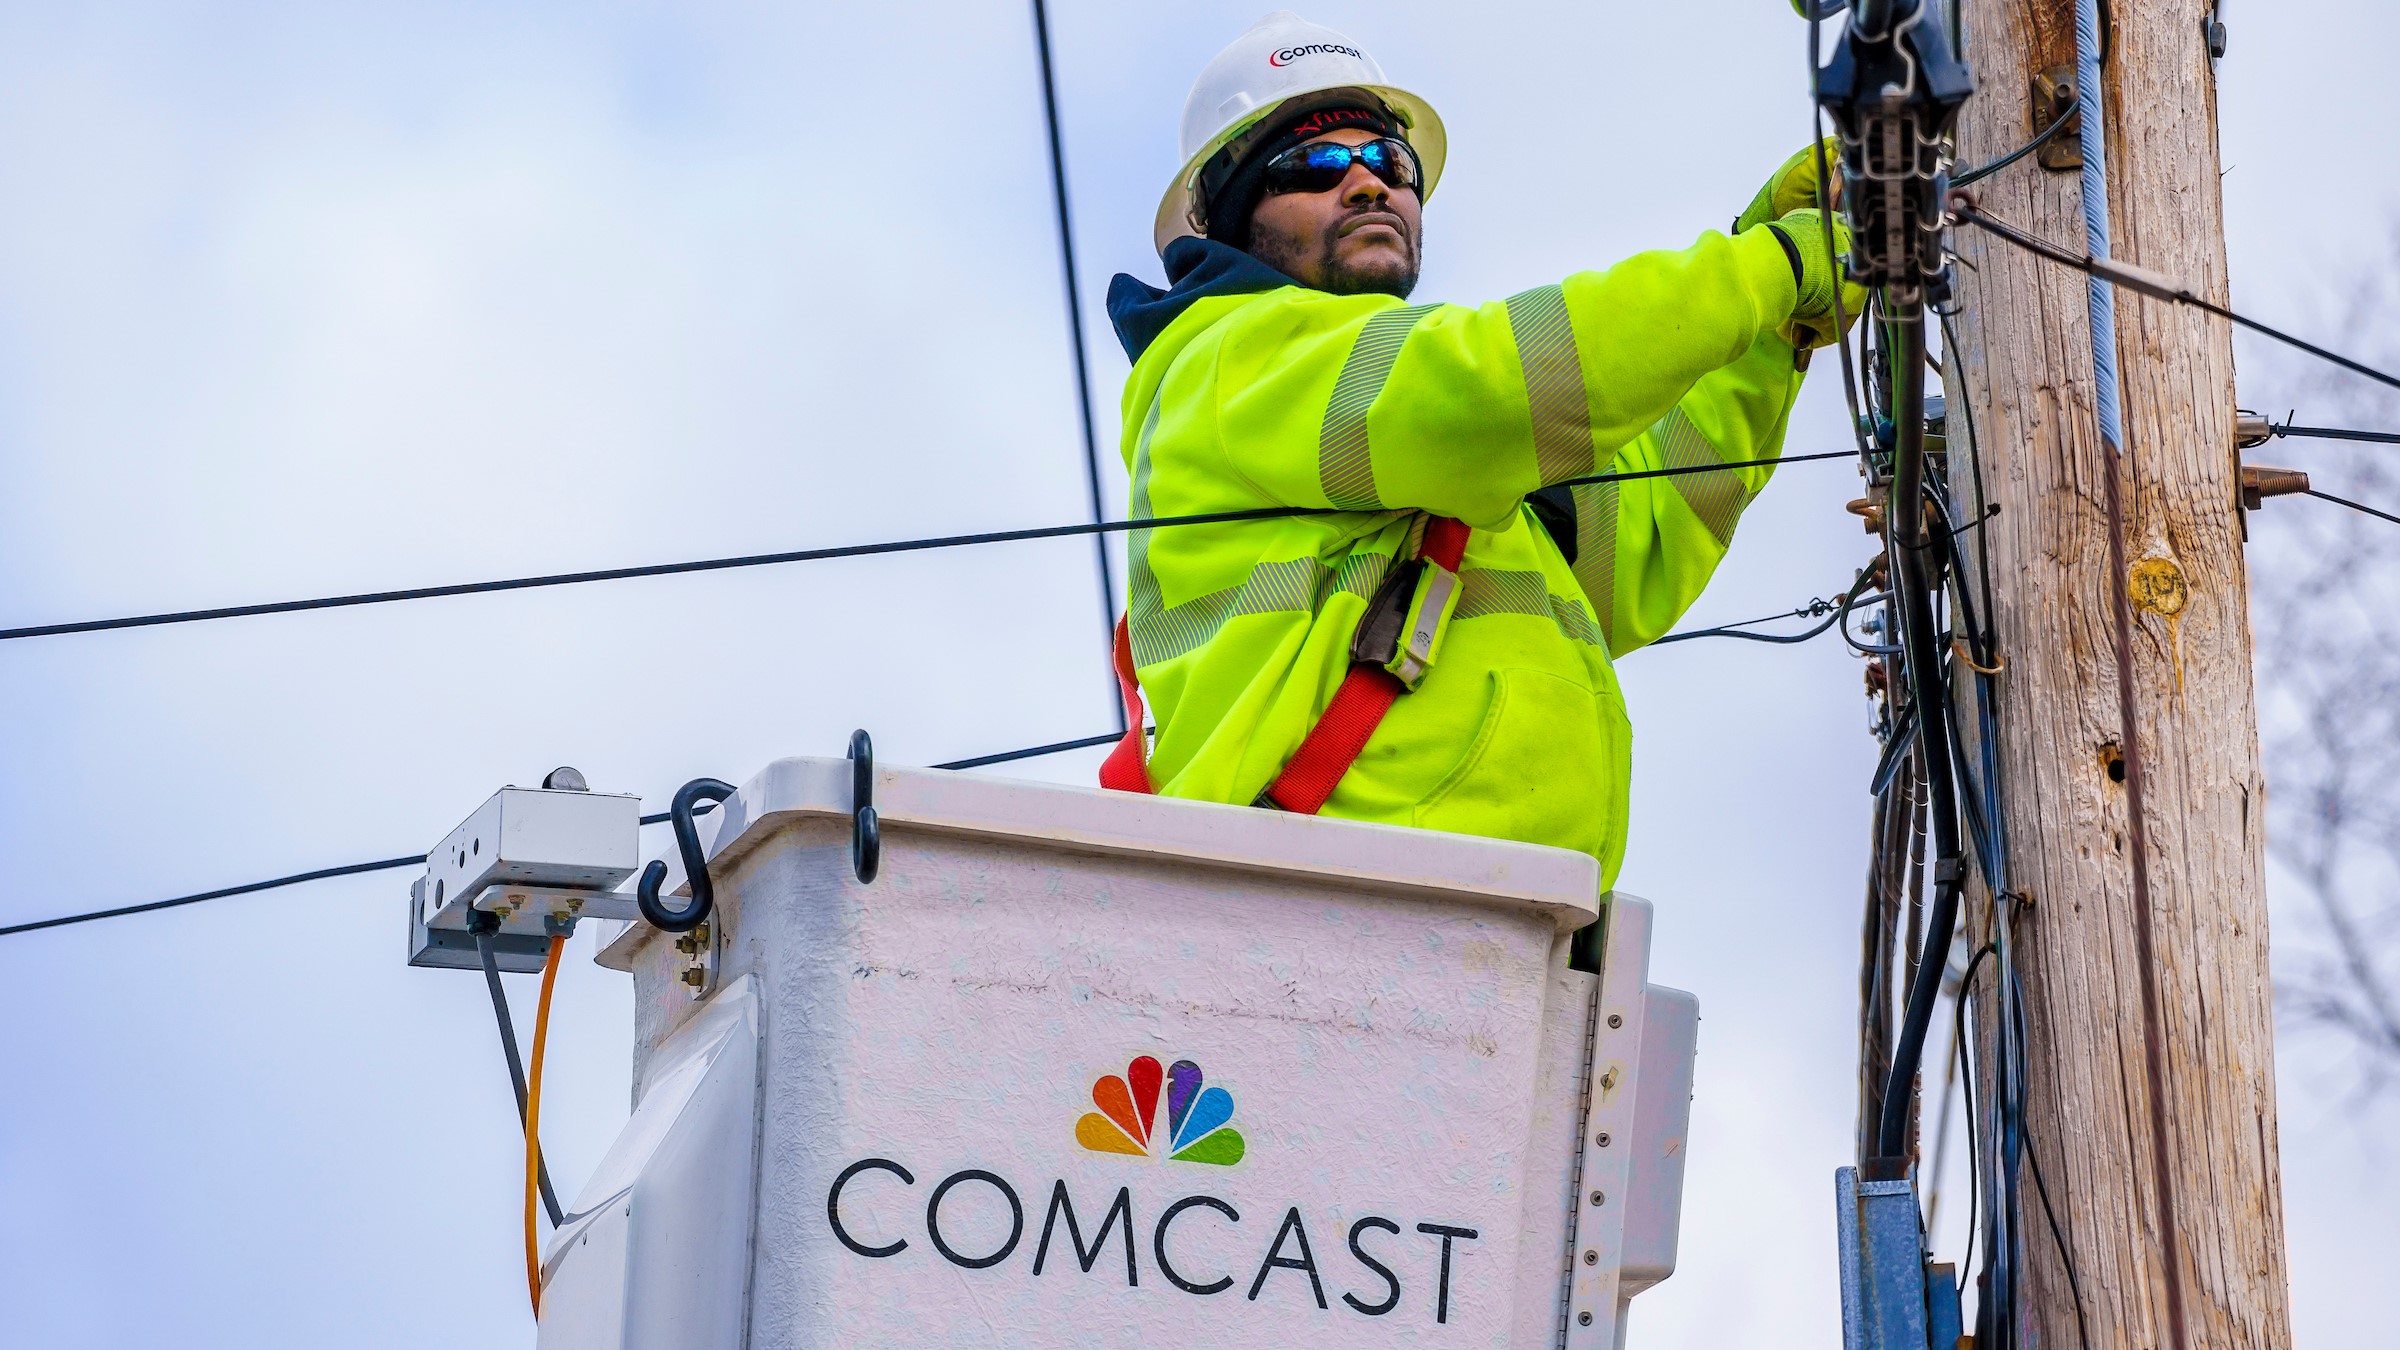 Leominster, MA Flooding, Storm Recovery: Access 700+ Free Xfinity WiFi Hotspots and Stay Connected with Comcast